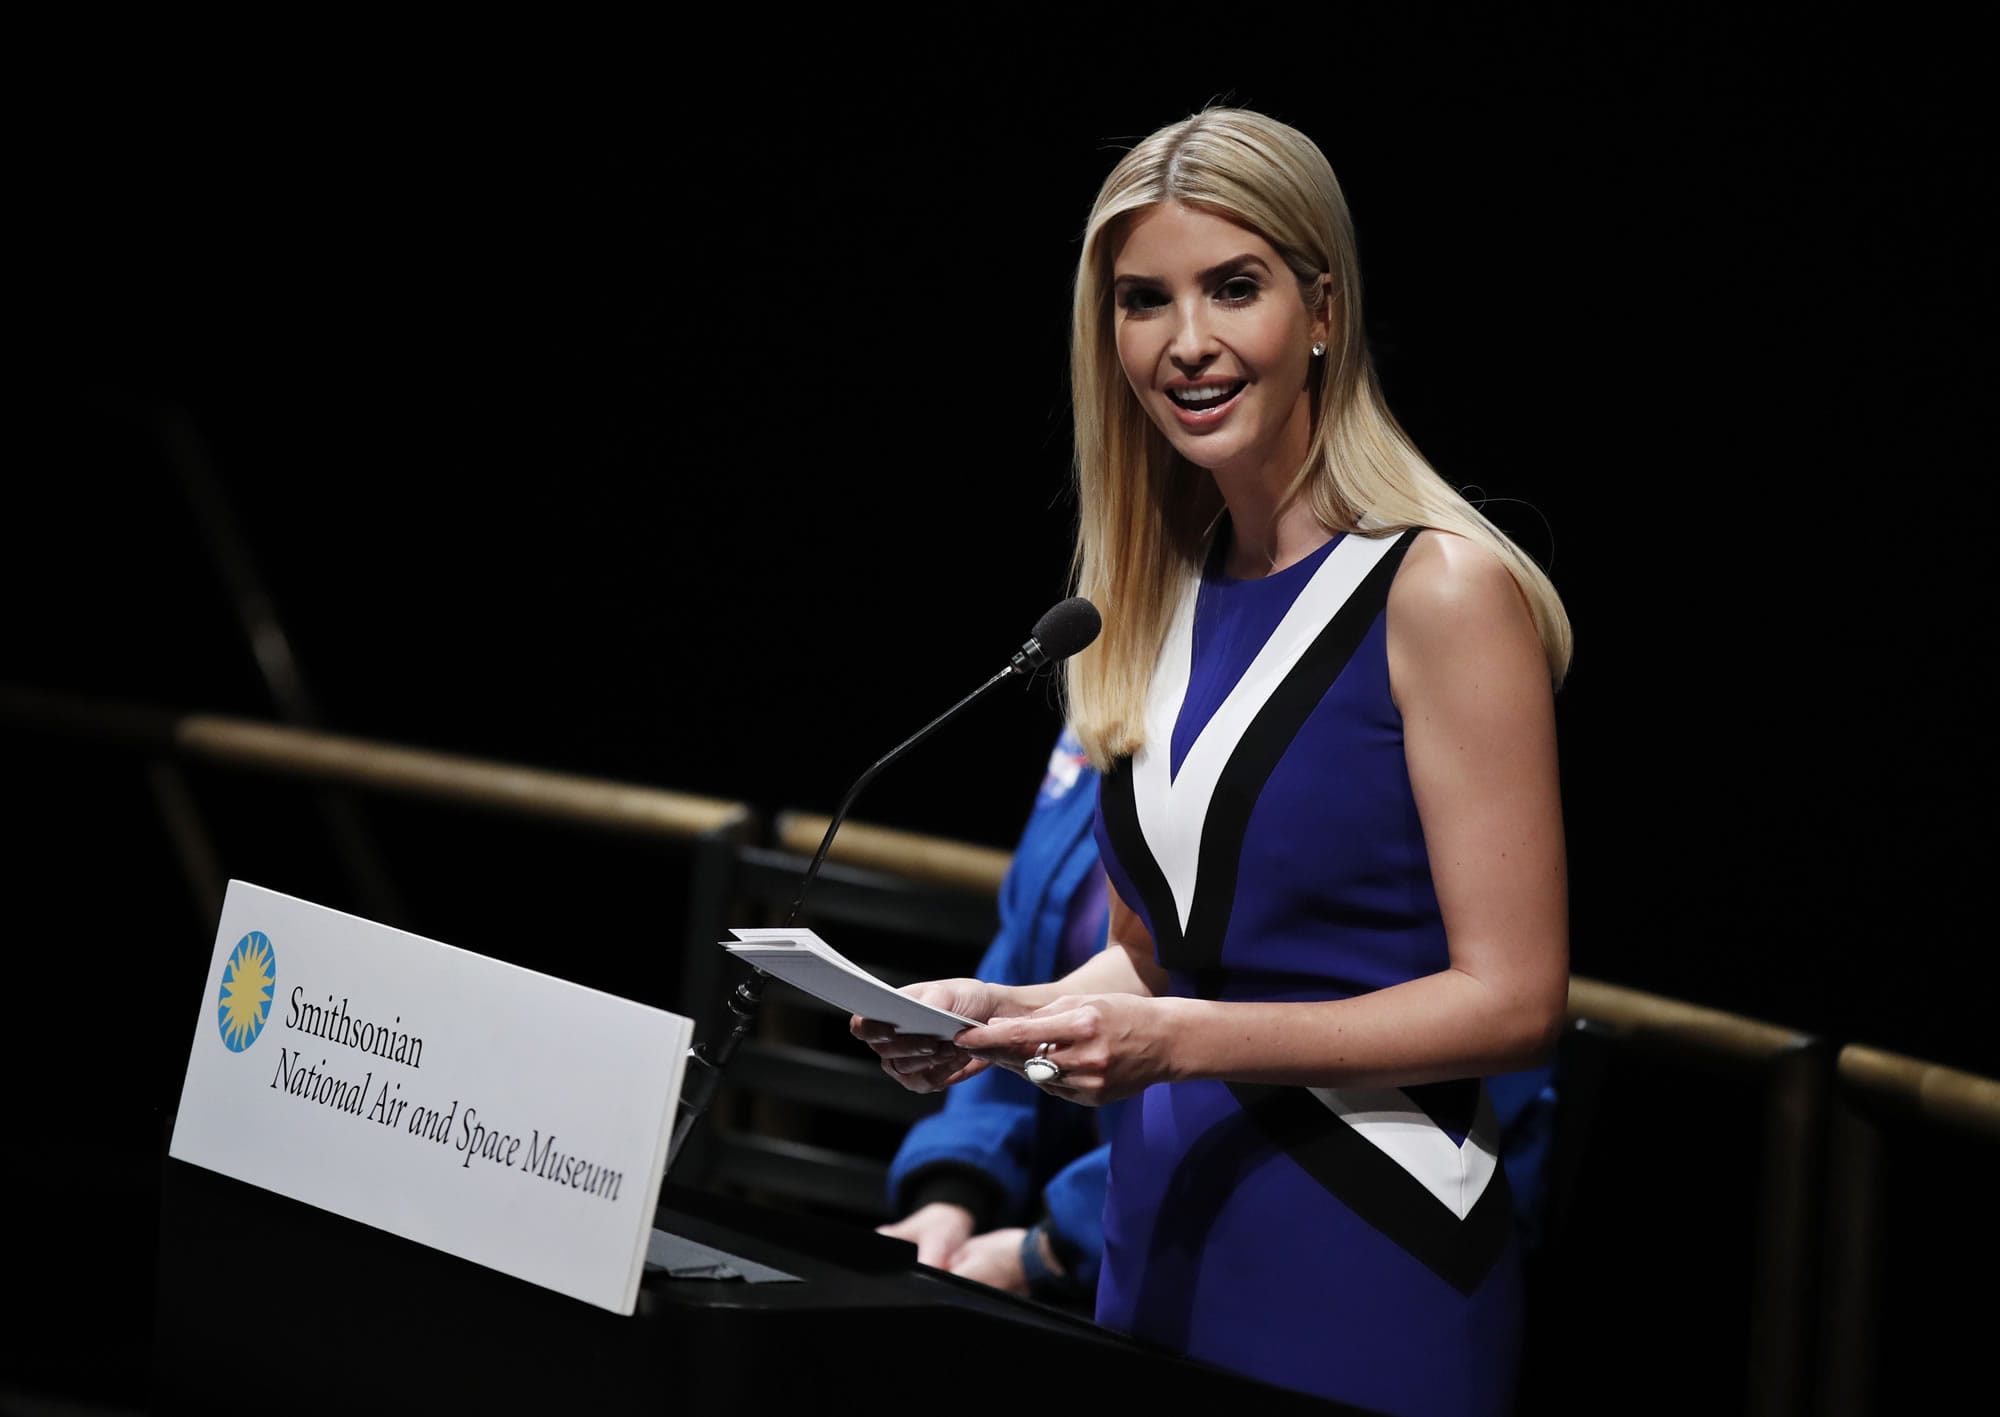 FILE - In this March 28, 2017 file photo, Ivanka Trump speaks at the Smithsonian's National Air and Space Museum in Washington. Ivanka Trump announced Wednesday, March 29, 2017, that she will serve as an unpaid employee in the White House.